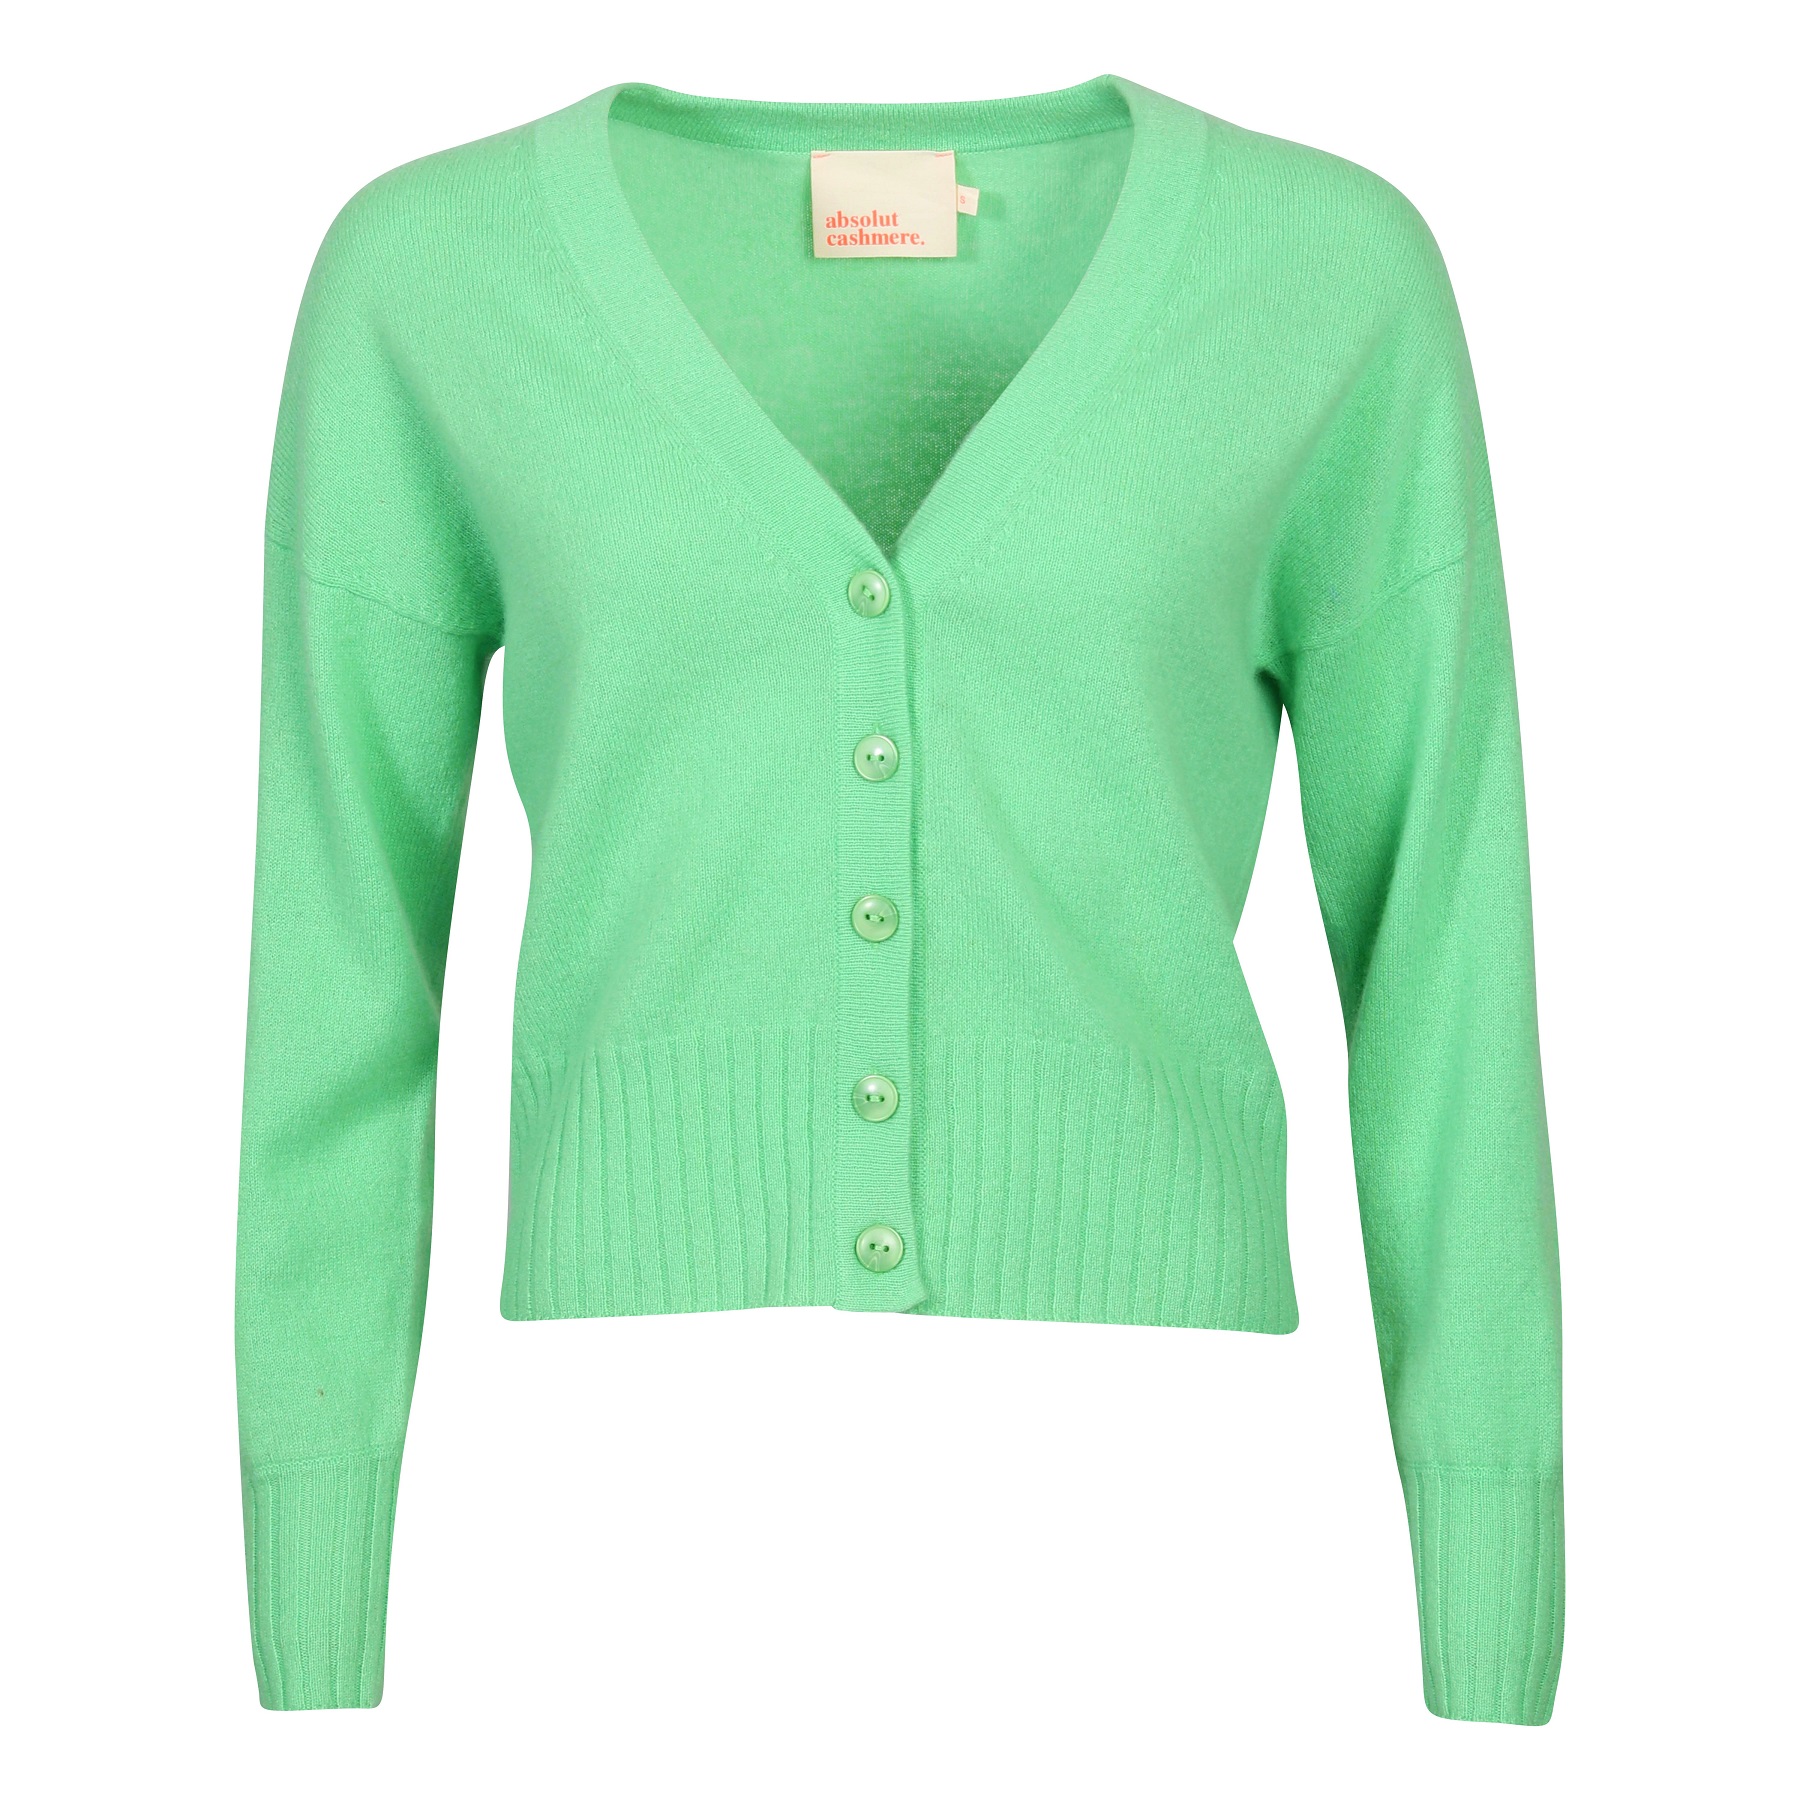 Absolut Cashmere Cardigan in Light Green S